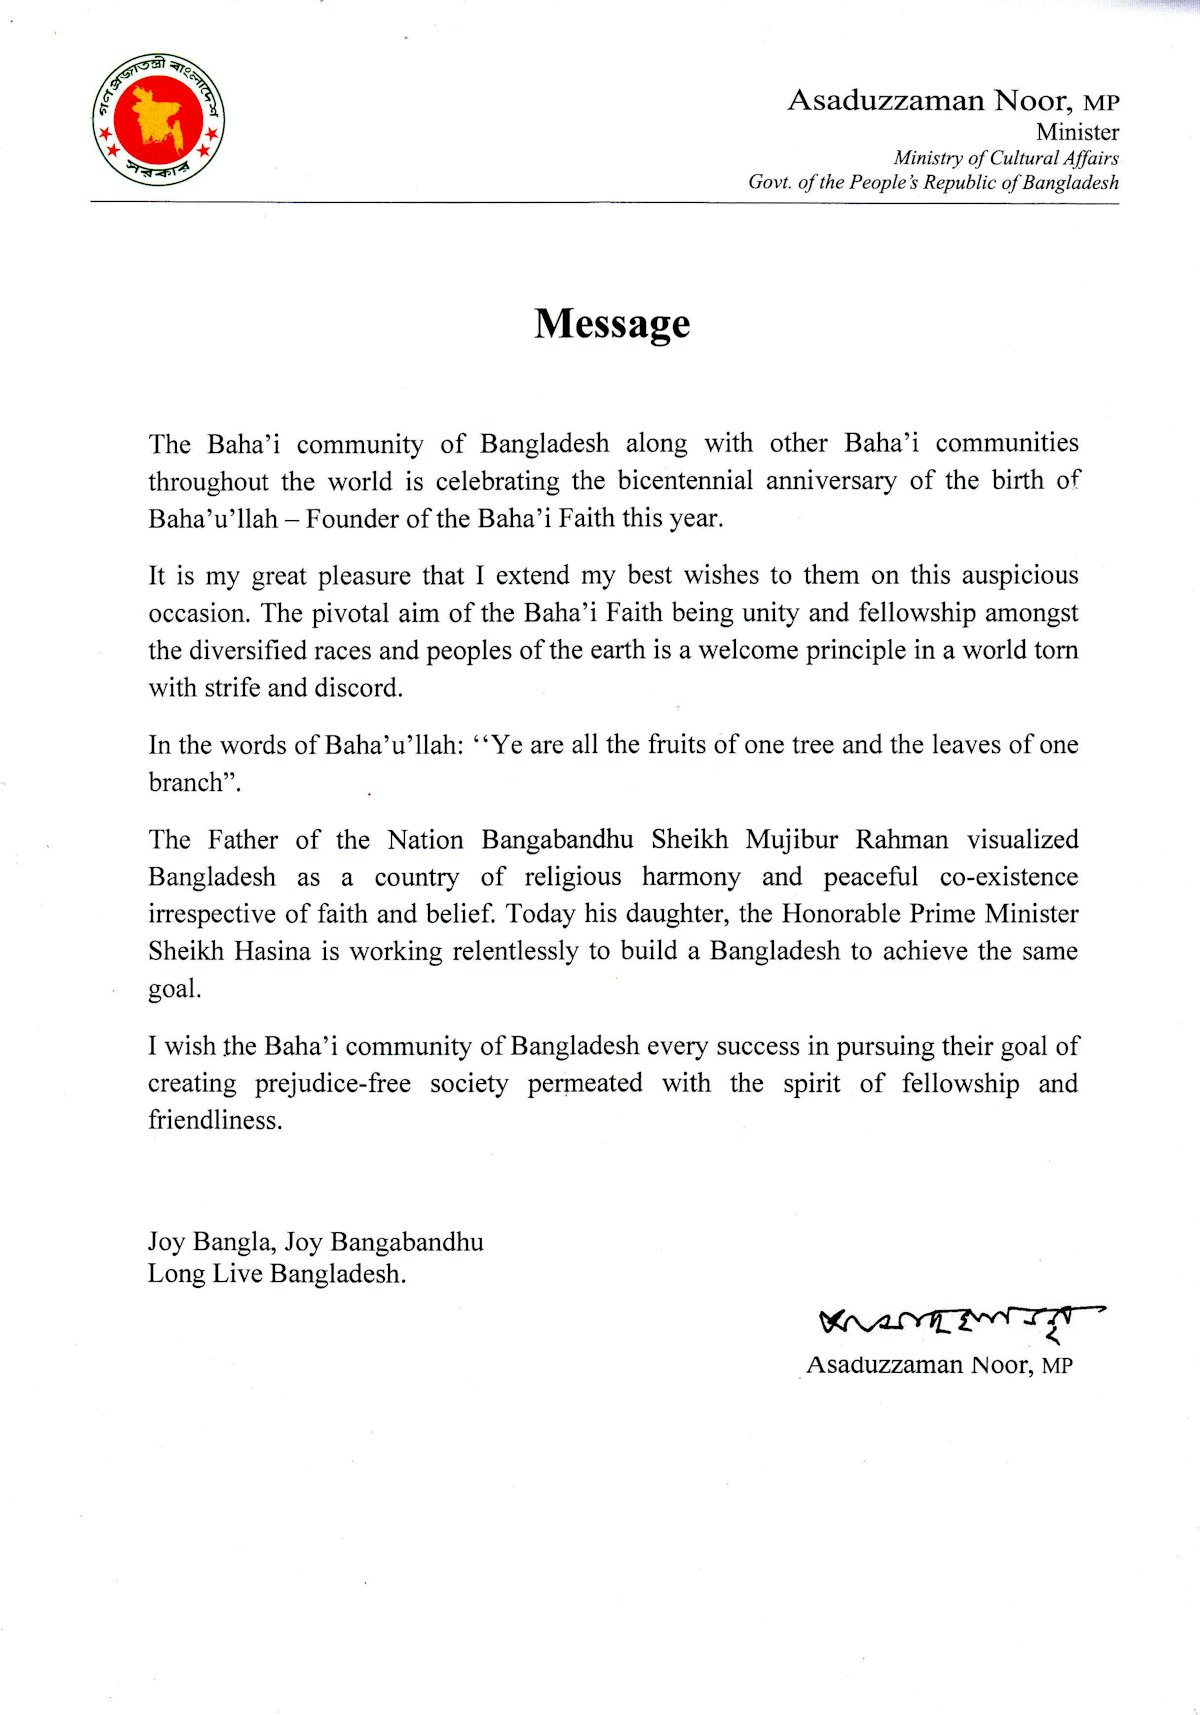 A message from Asaduzzaman Noor, Bangladesh’s Minister of Cultural Affairs, to the Baha’i community.